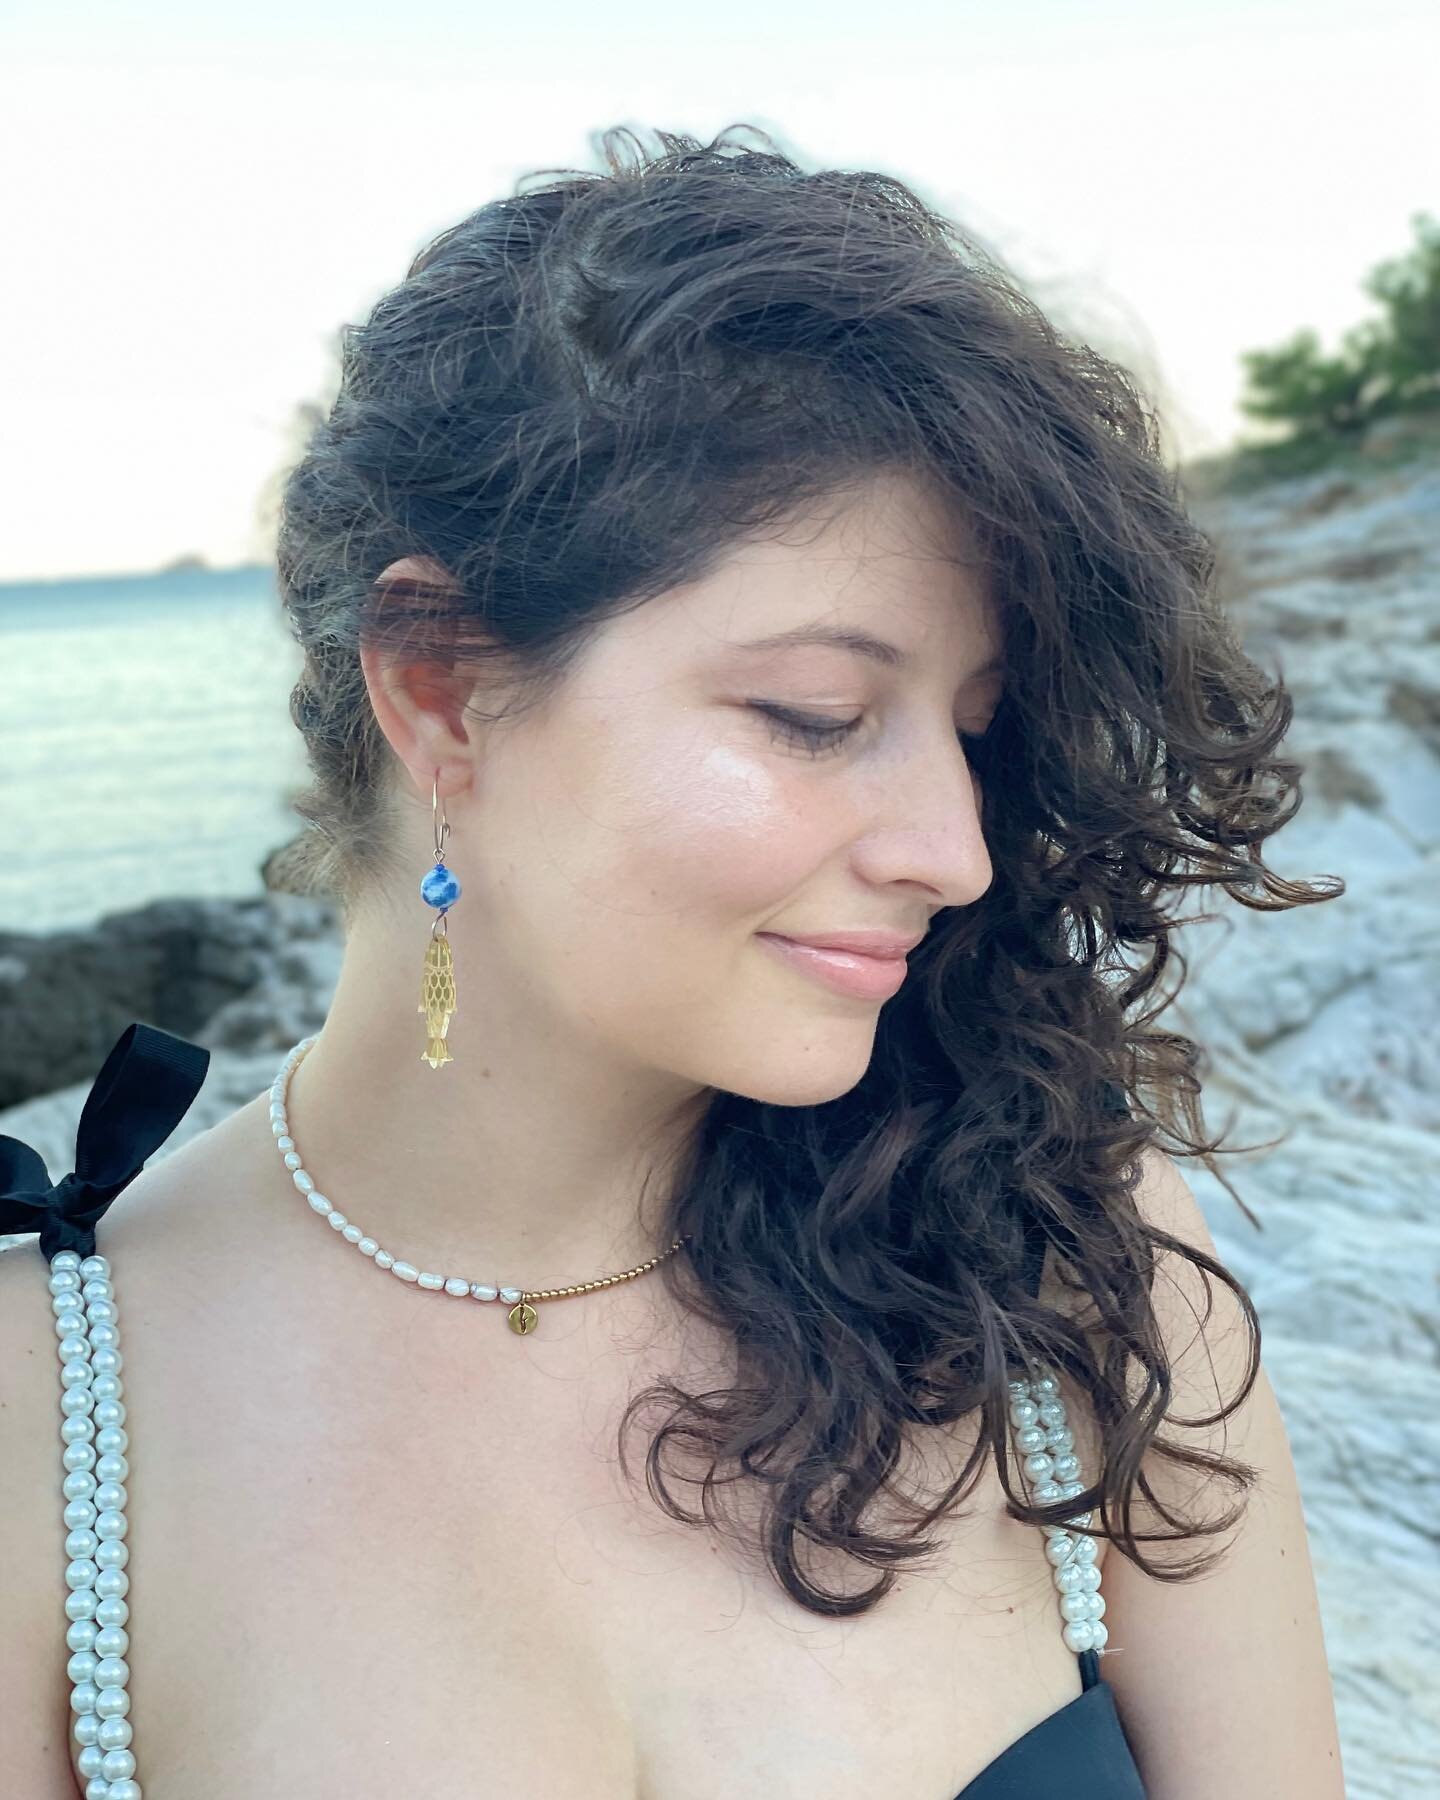 For the love of Sea.

I am a dreamer, a Pisces. I am also geniunely astonished by the magic of Greek mythology ever since I have first read about it. If I were part of this magical world I would most certainely be a daughter of Posseidon.

#sealover 